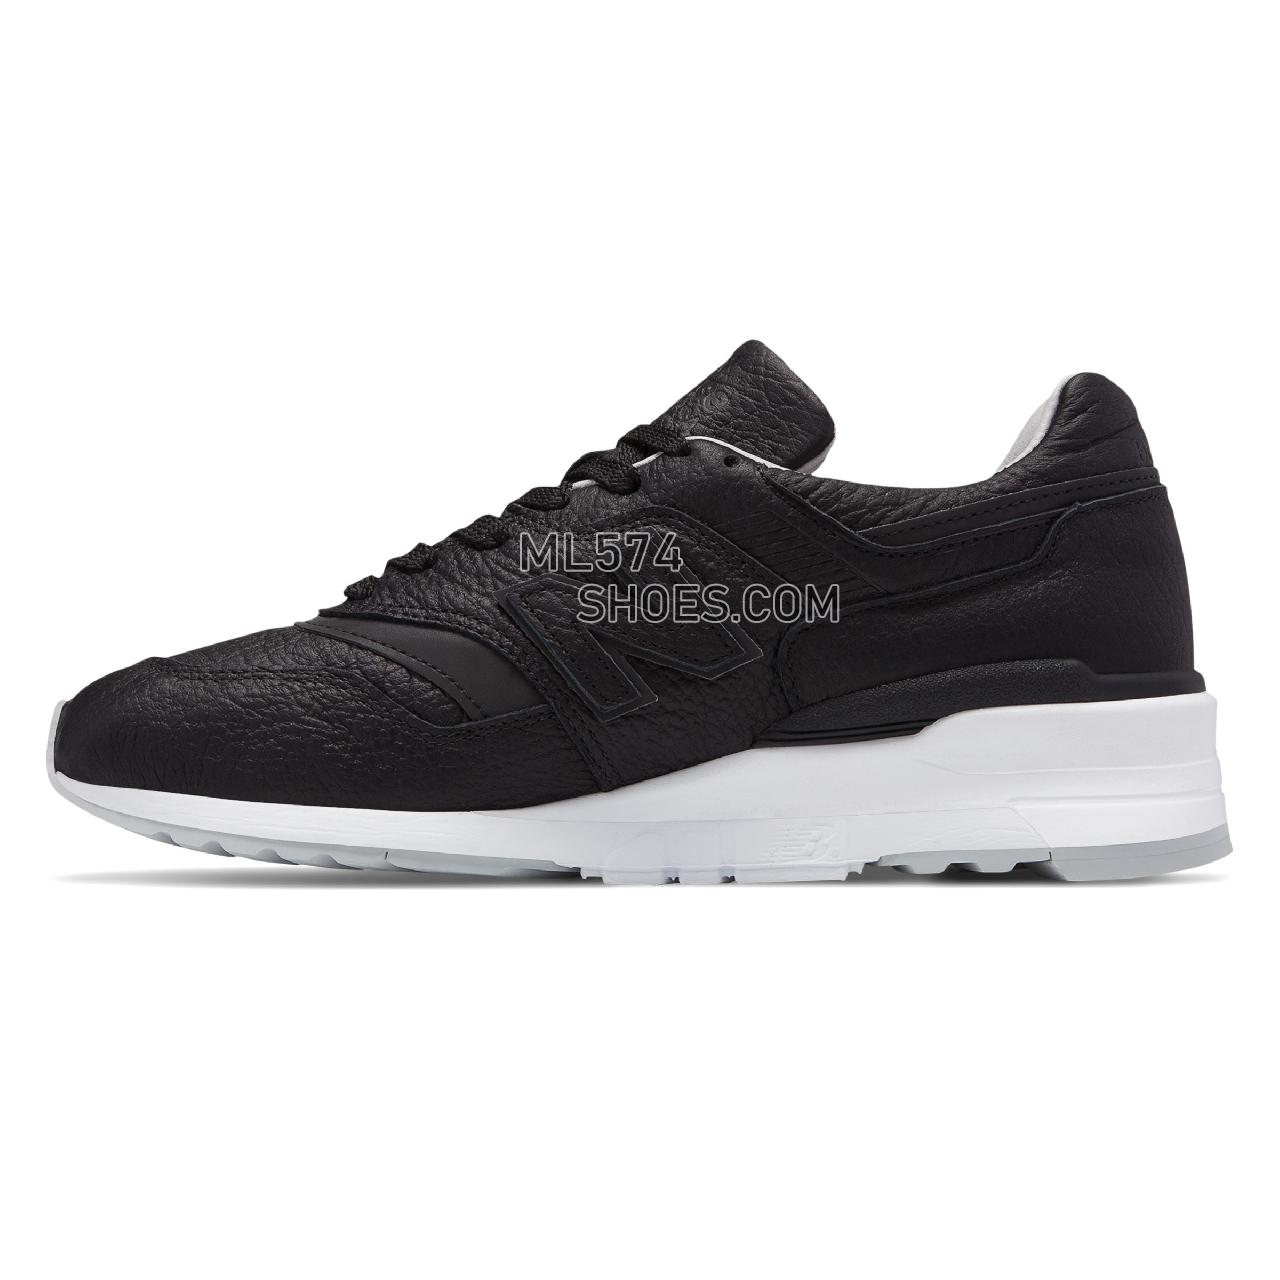 New Balance Made in US 997 Bison - Men's 997 Made in US Classic M997-LH - Black with Grey - M997BSO